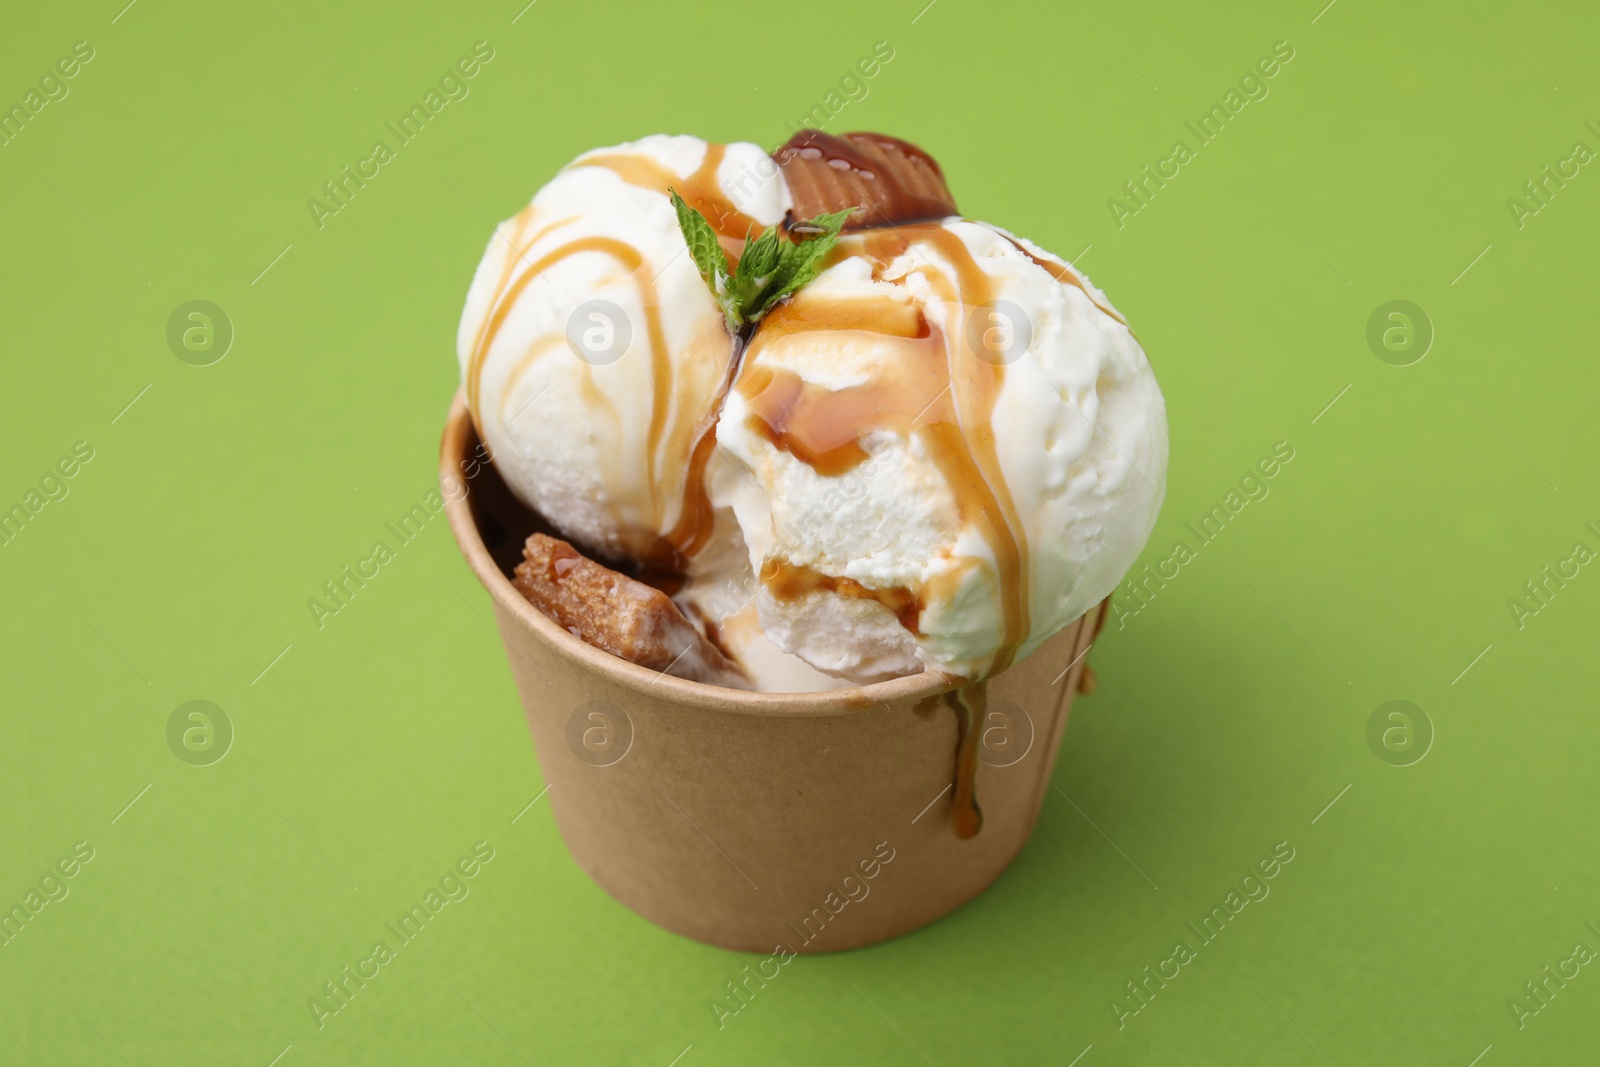 Photo of Scoops of tasty ice cream with mint leaves, caramel sauce and candies in paper cup on green background